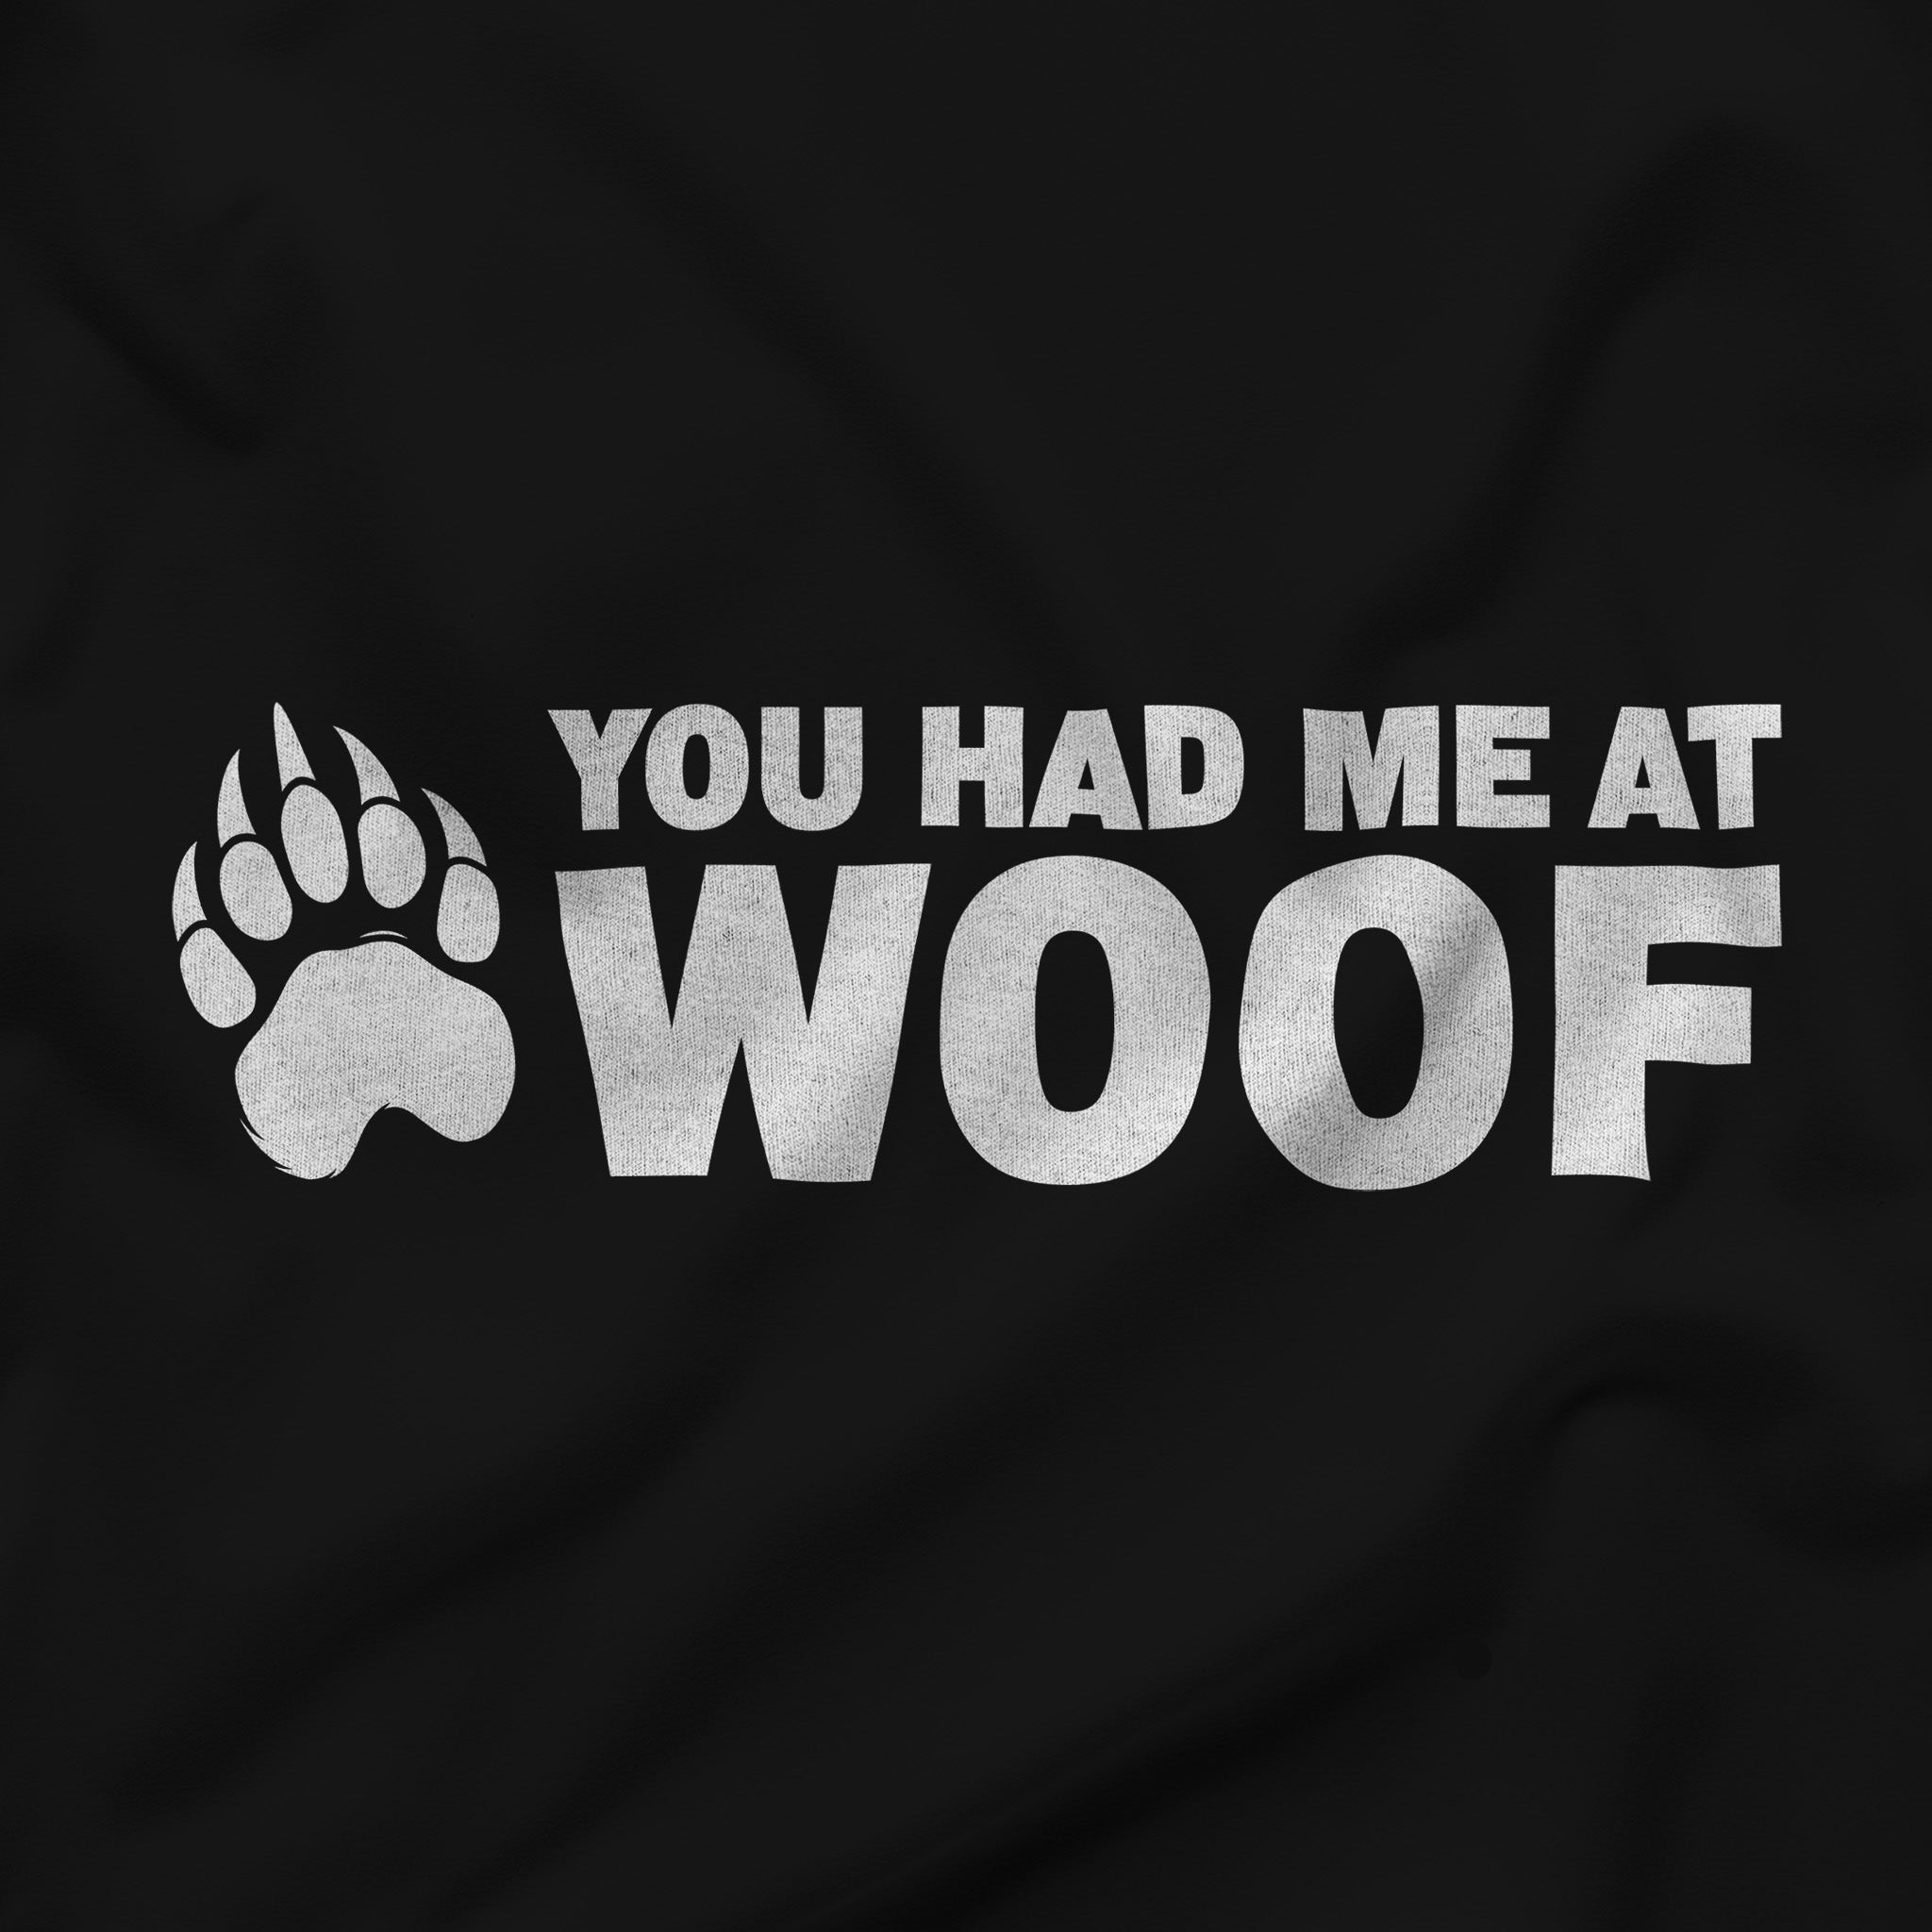 You Had Me at Woof Tee – Speak the Language of Attraction - Hunky Tops